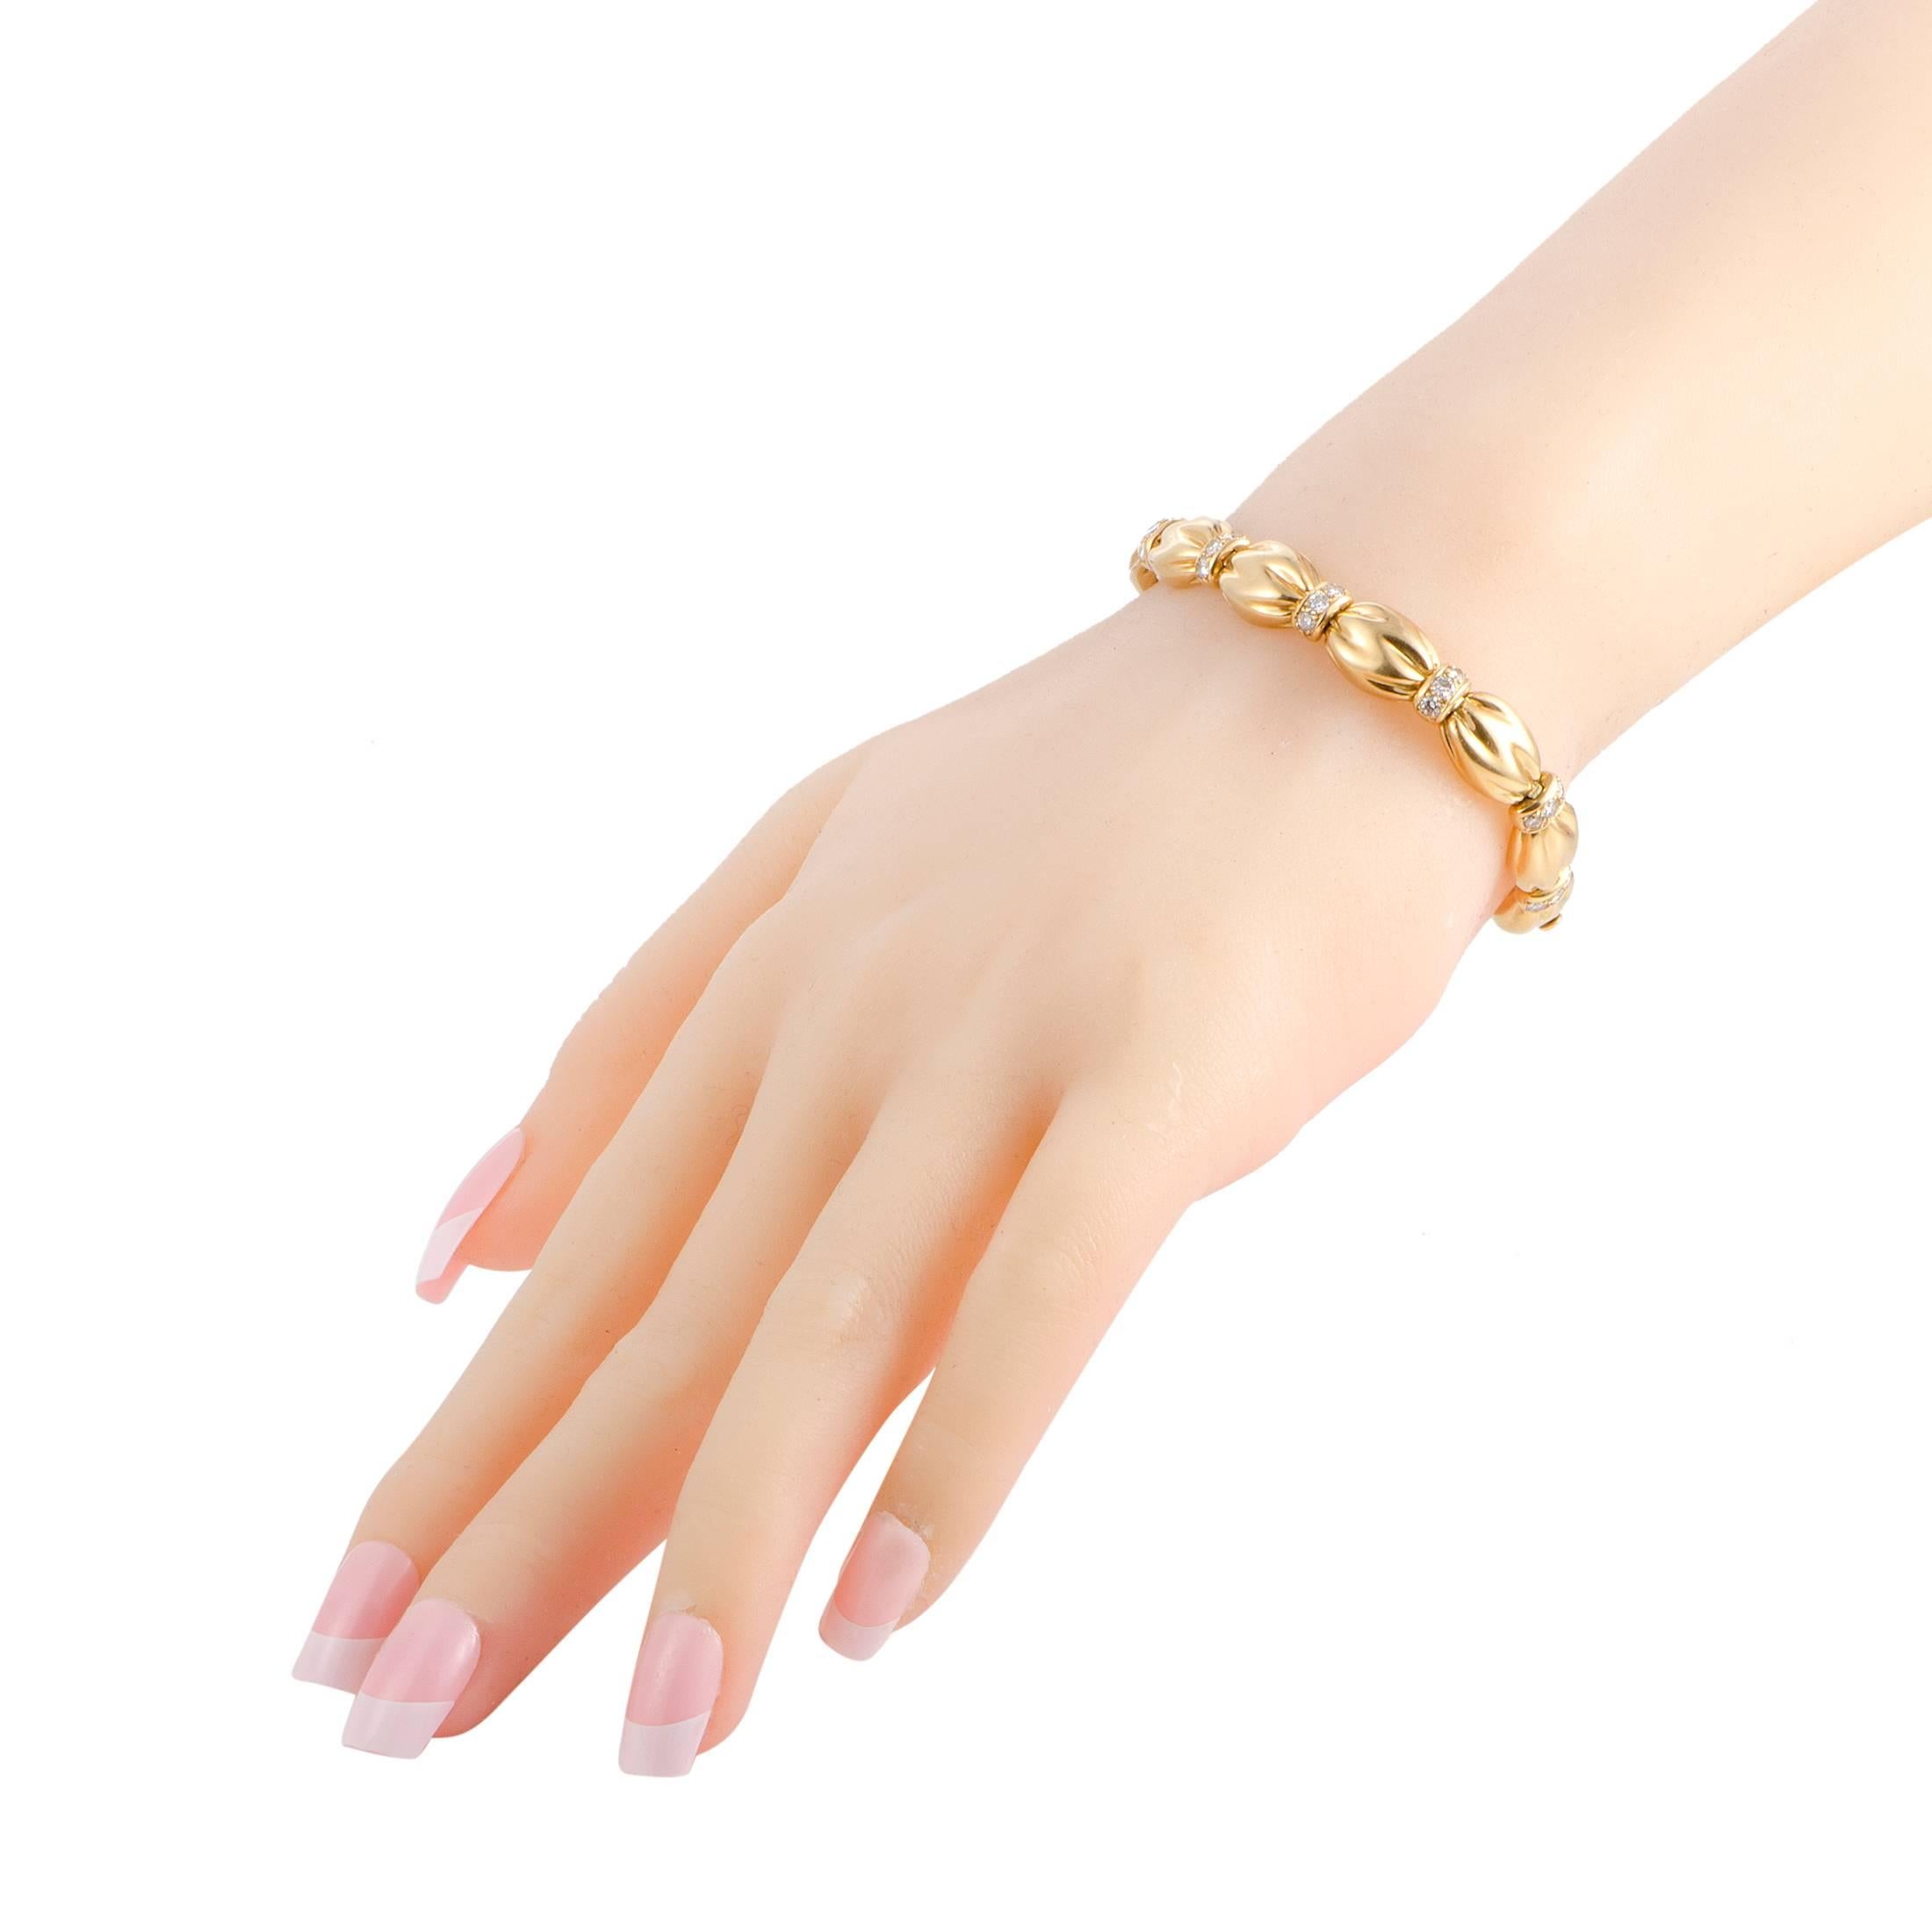 Brilliantly designed, expertly executed and tastefully embellished with sparkling F-color diamonds of VS clarity amounting to 1.67 carats, the fabulous 18K yellow gold sets a gorgeously feminine and luxurious tone in this stunning vintage bracelet